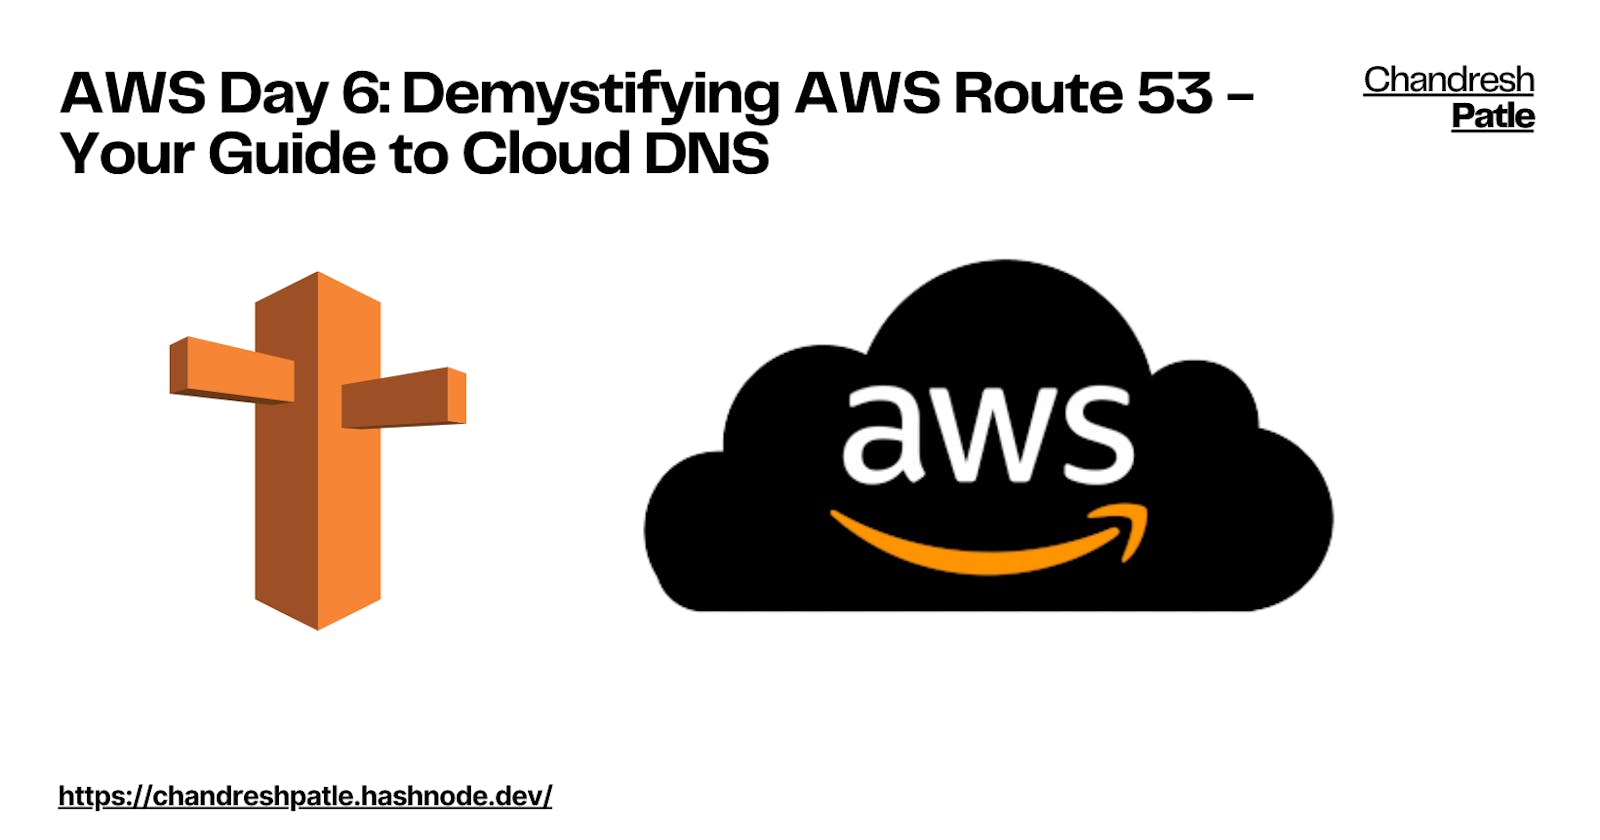 AWS Day 6: Demystifying AWS Route 53 - Your Guide to Cloud DNS